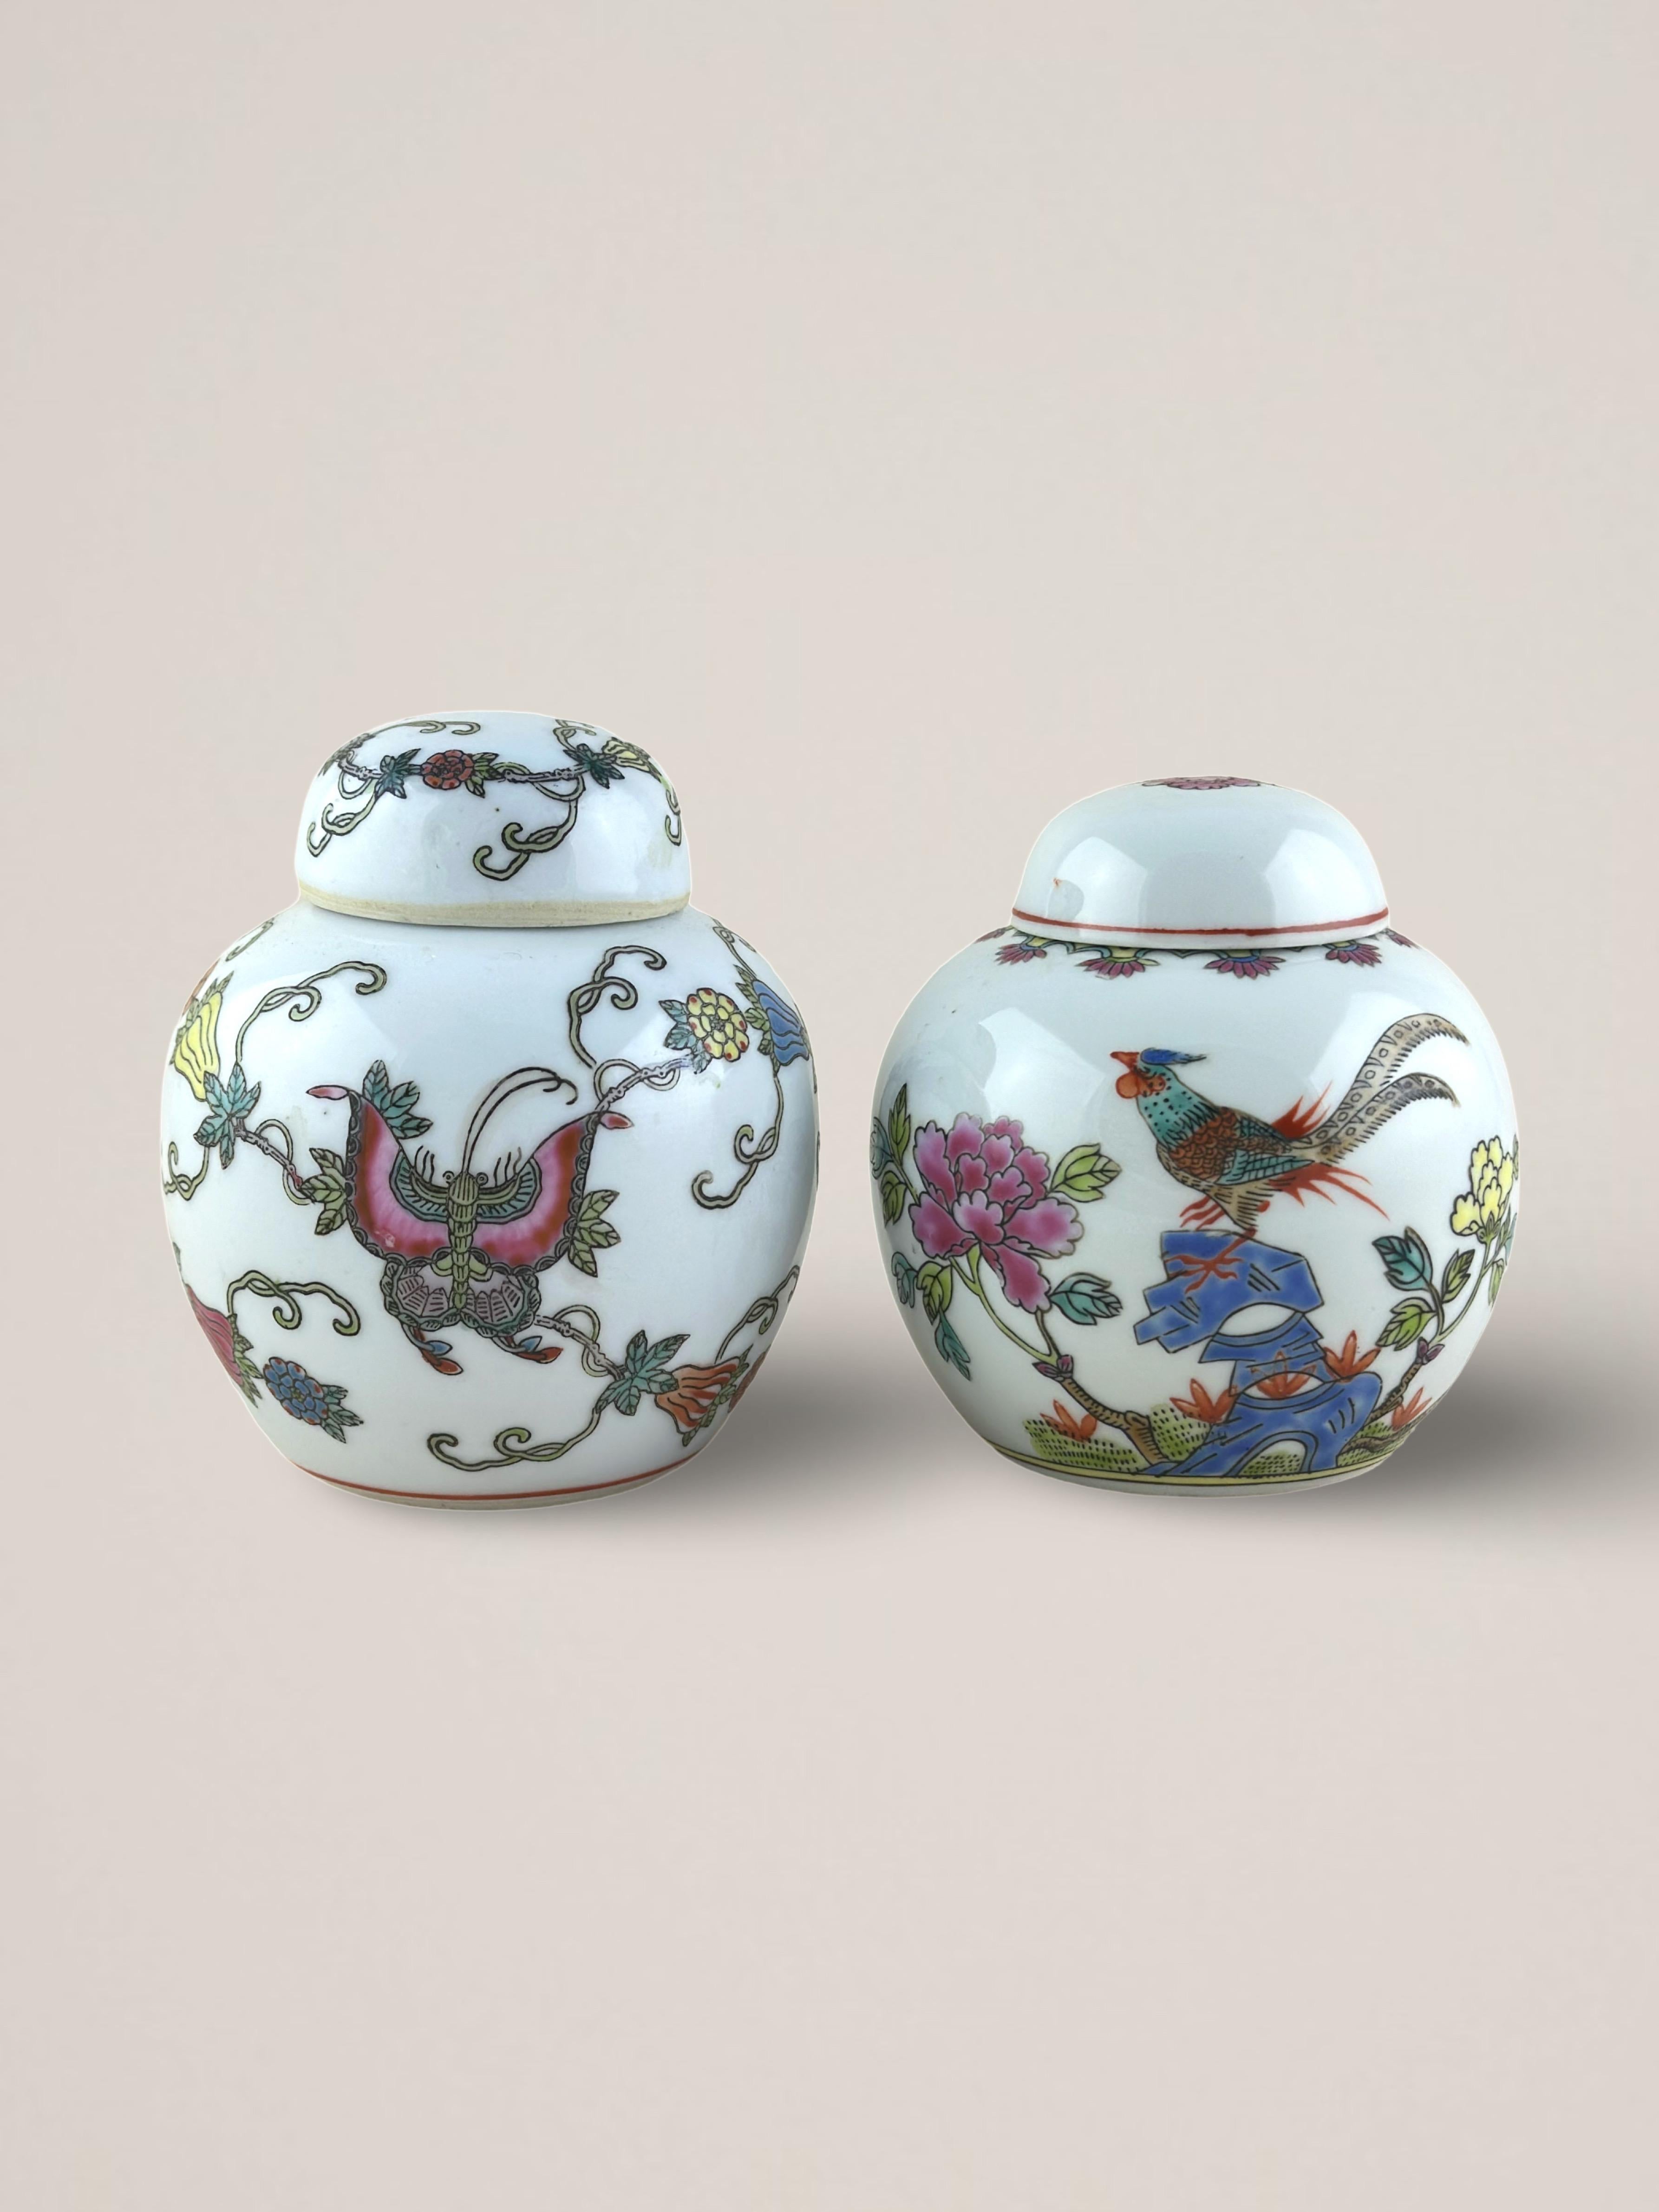 A pair of vintage ginger jars, handcrafted in Jingdezhen, China, in the 1970s, 

Both gingers jars are hand decorated; and exhibit the colourful wucai  technique. The wucai method involves painting and decorating the porcelain with enamels after the